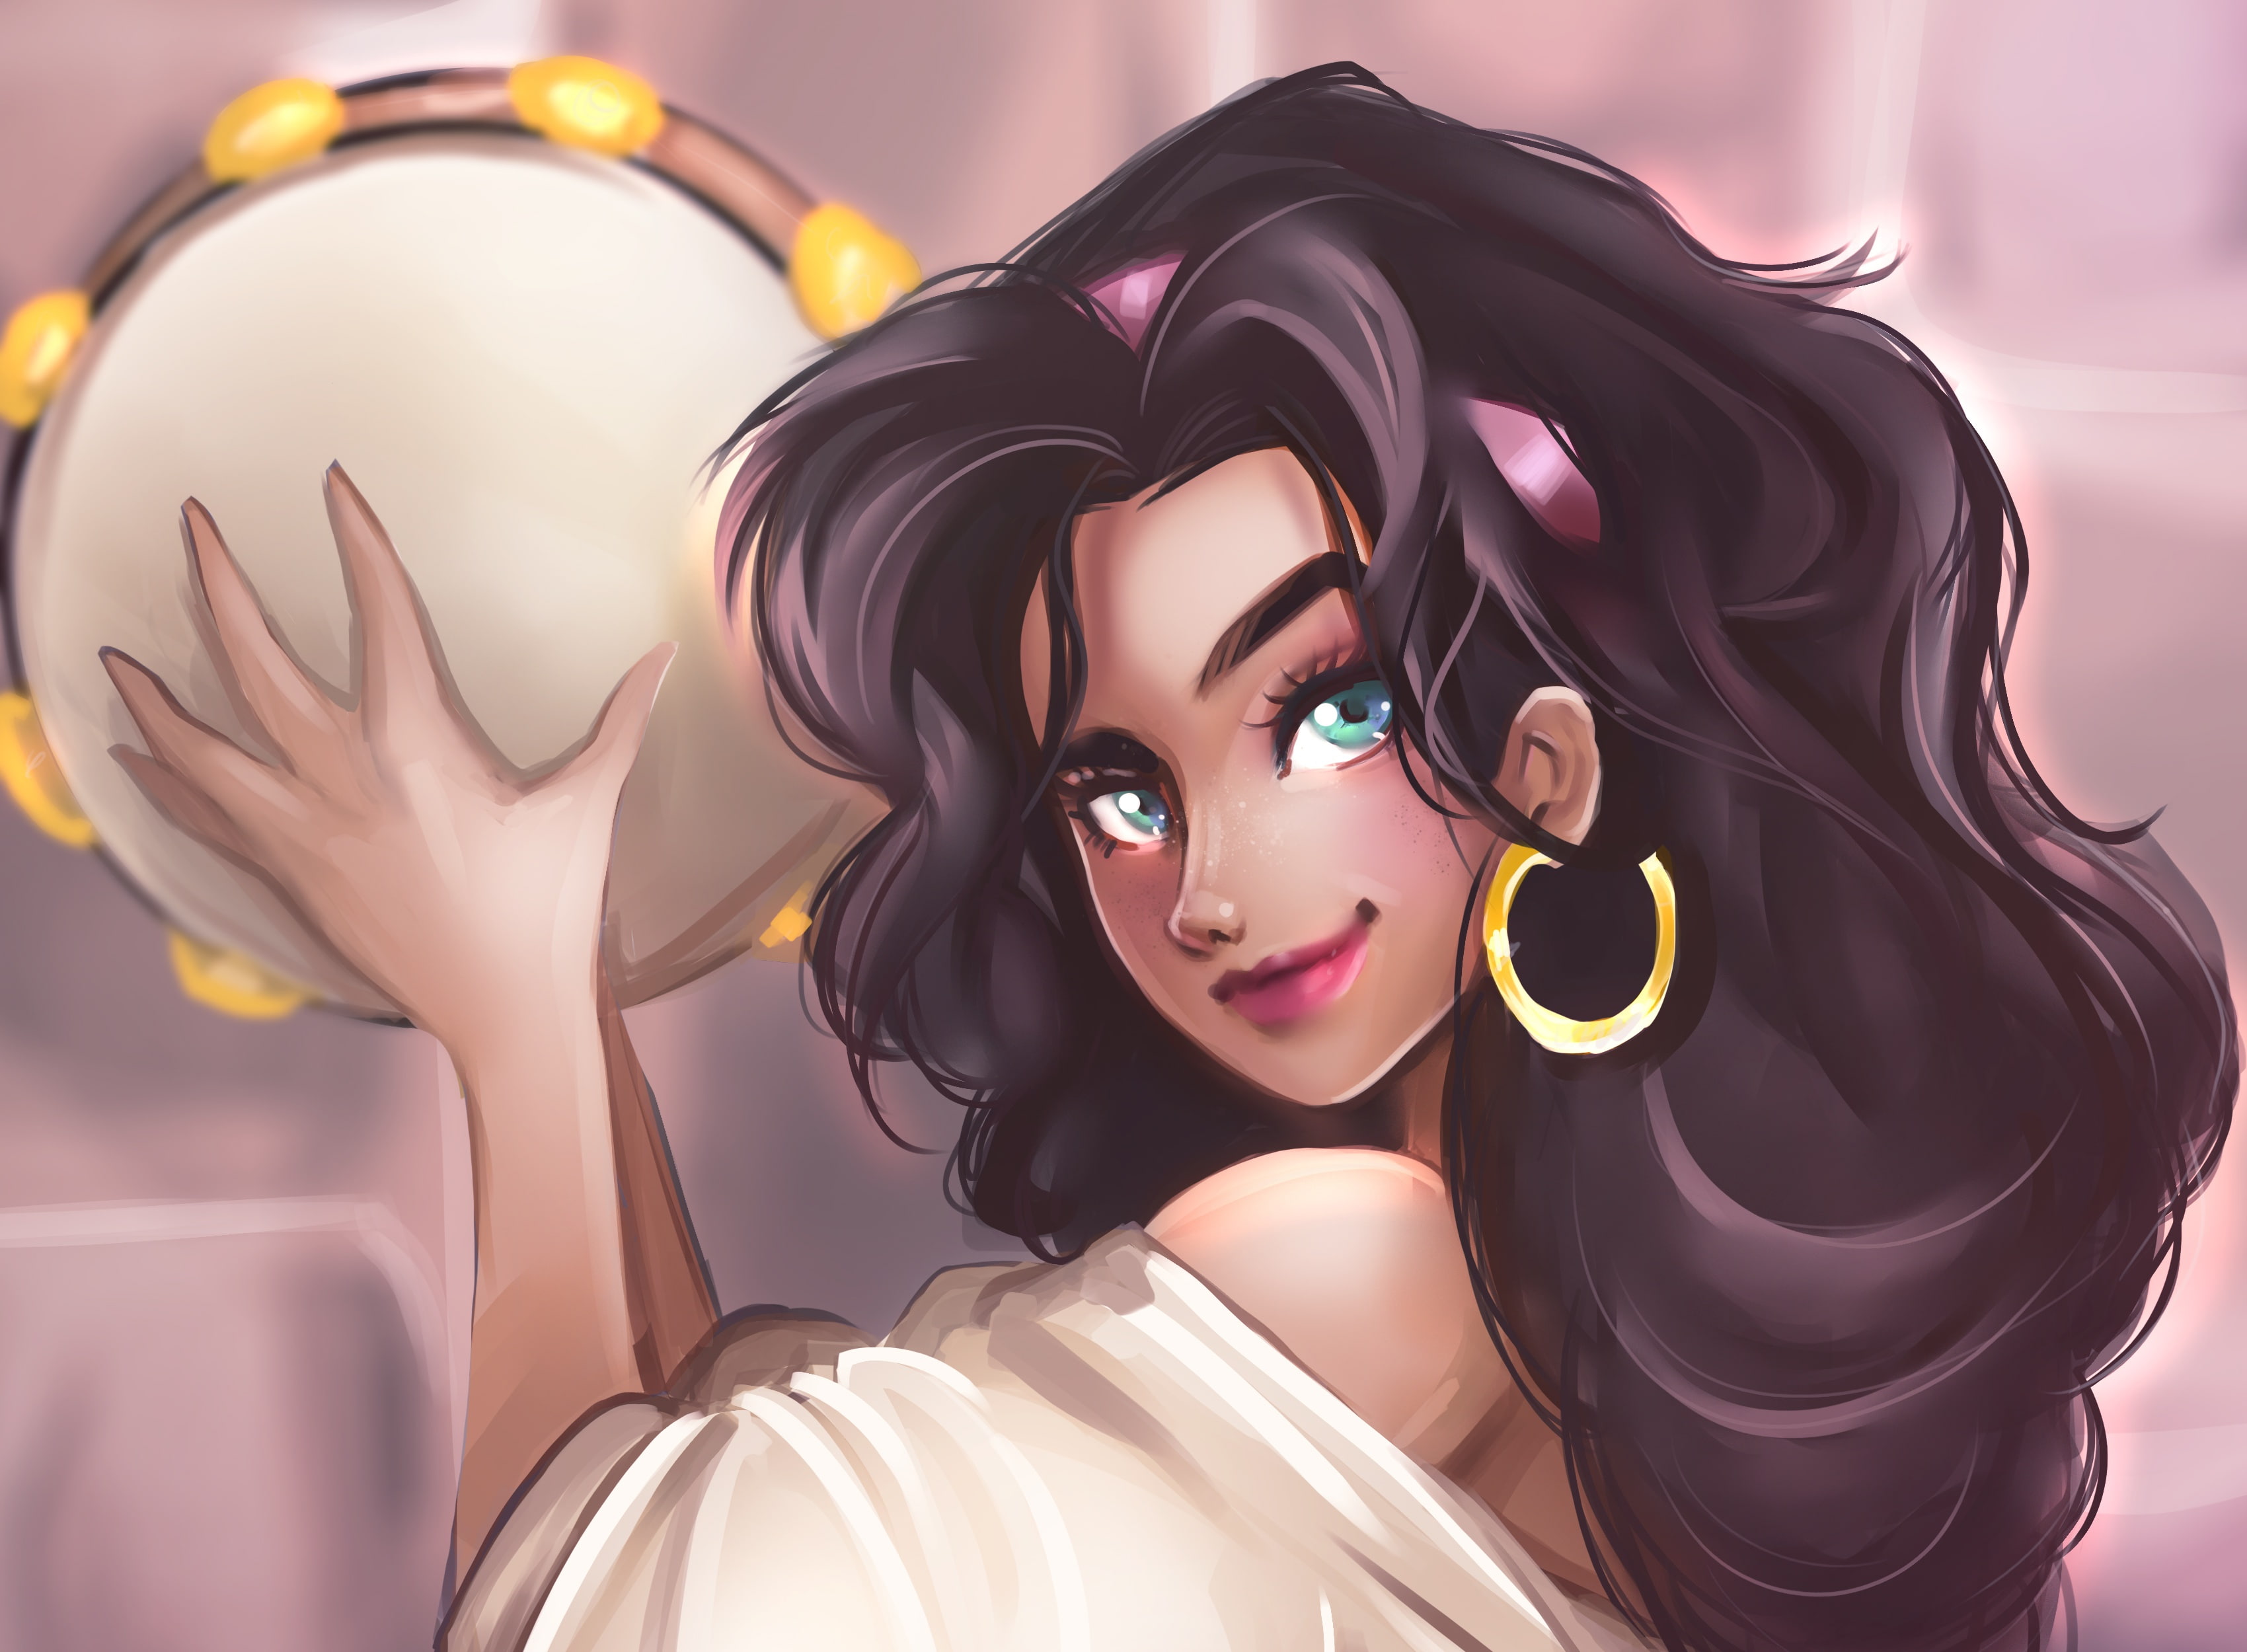 Esmeralda, by Kachumi, The hunchback of Notre Dame